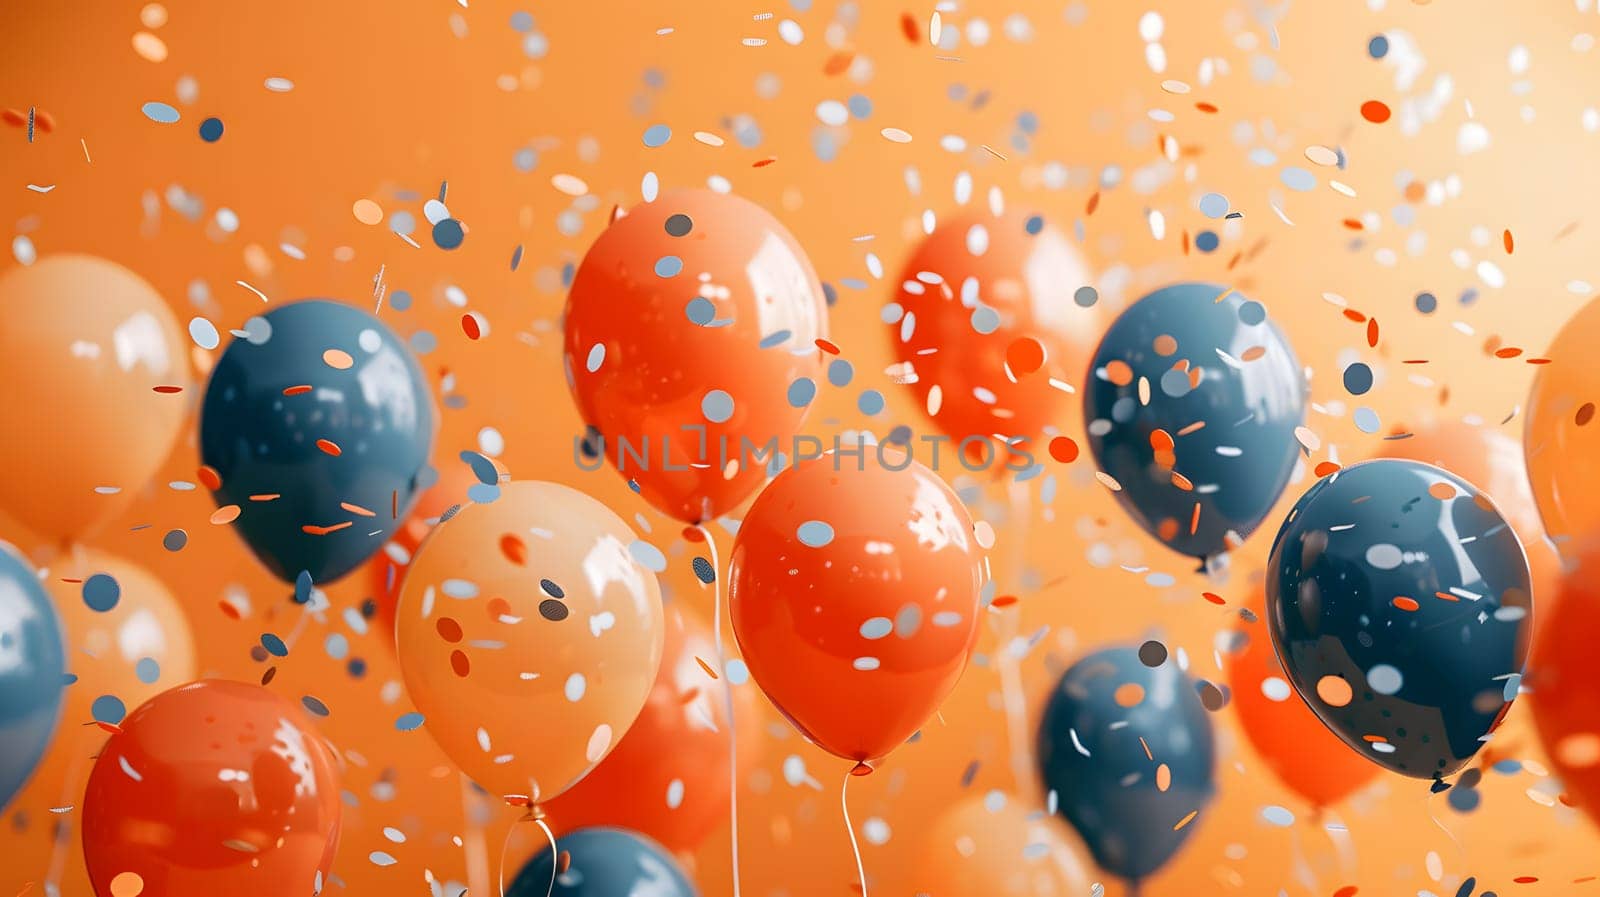 Electric blue liquid bubbles and orange fluid organism float underwater, creating a colorful scene reminiscent of balloons and confetti in the air